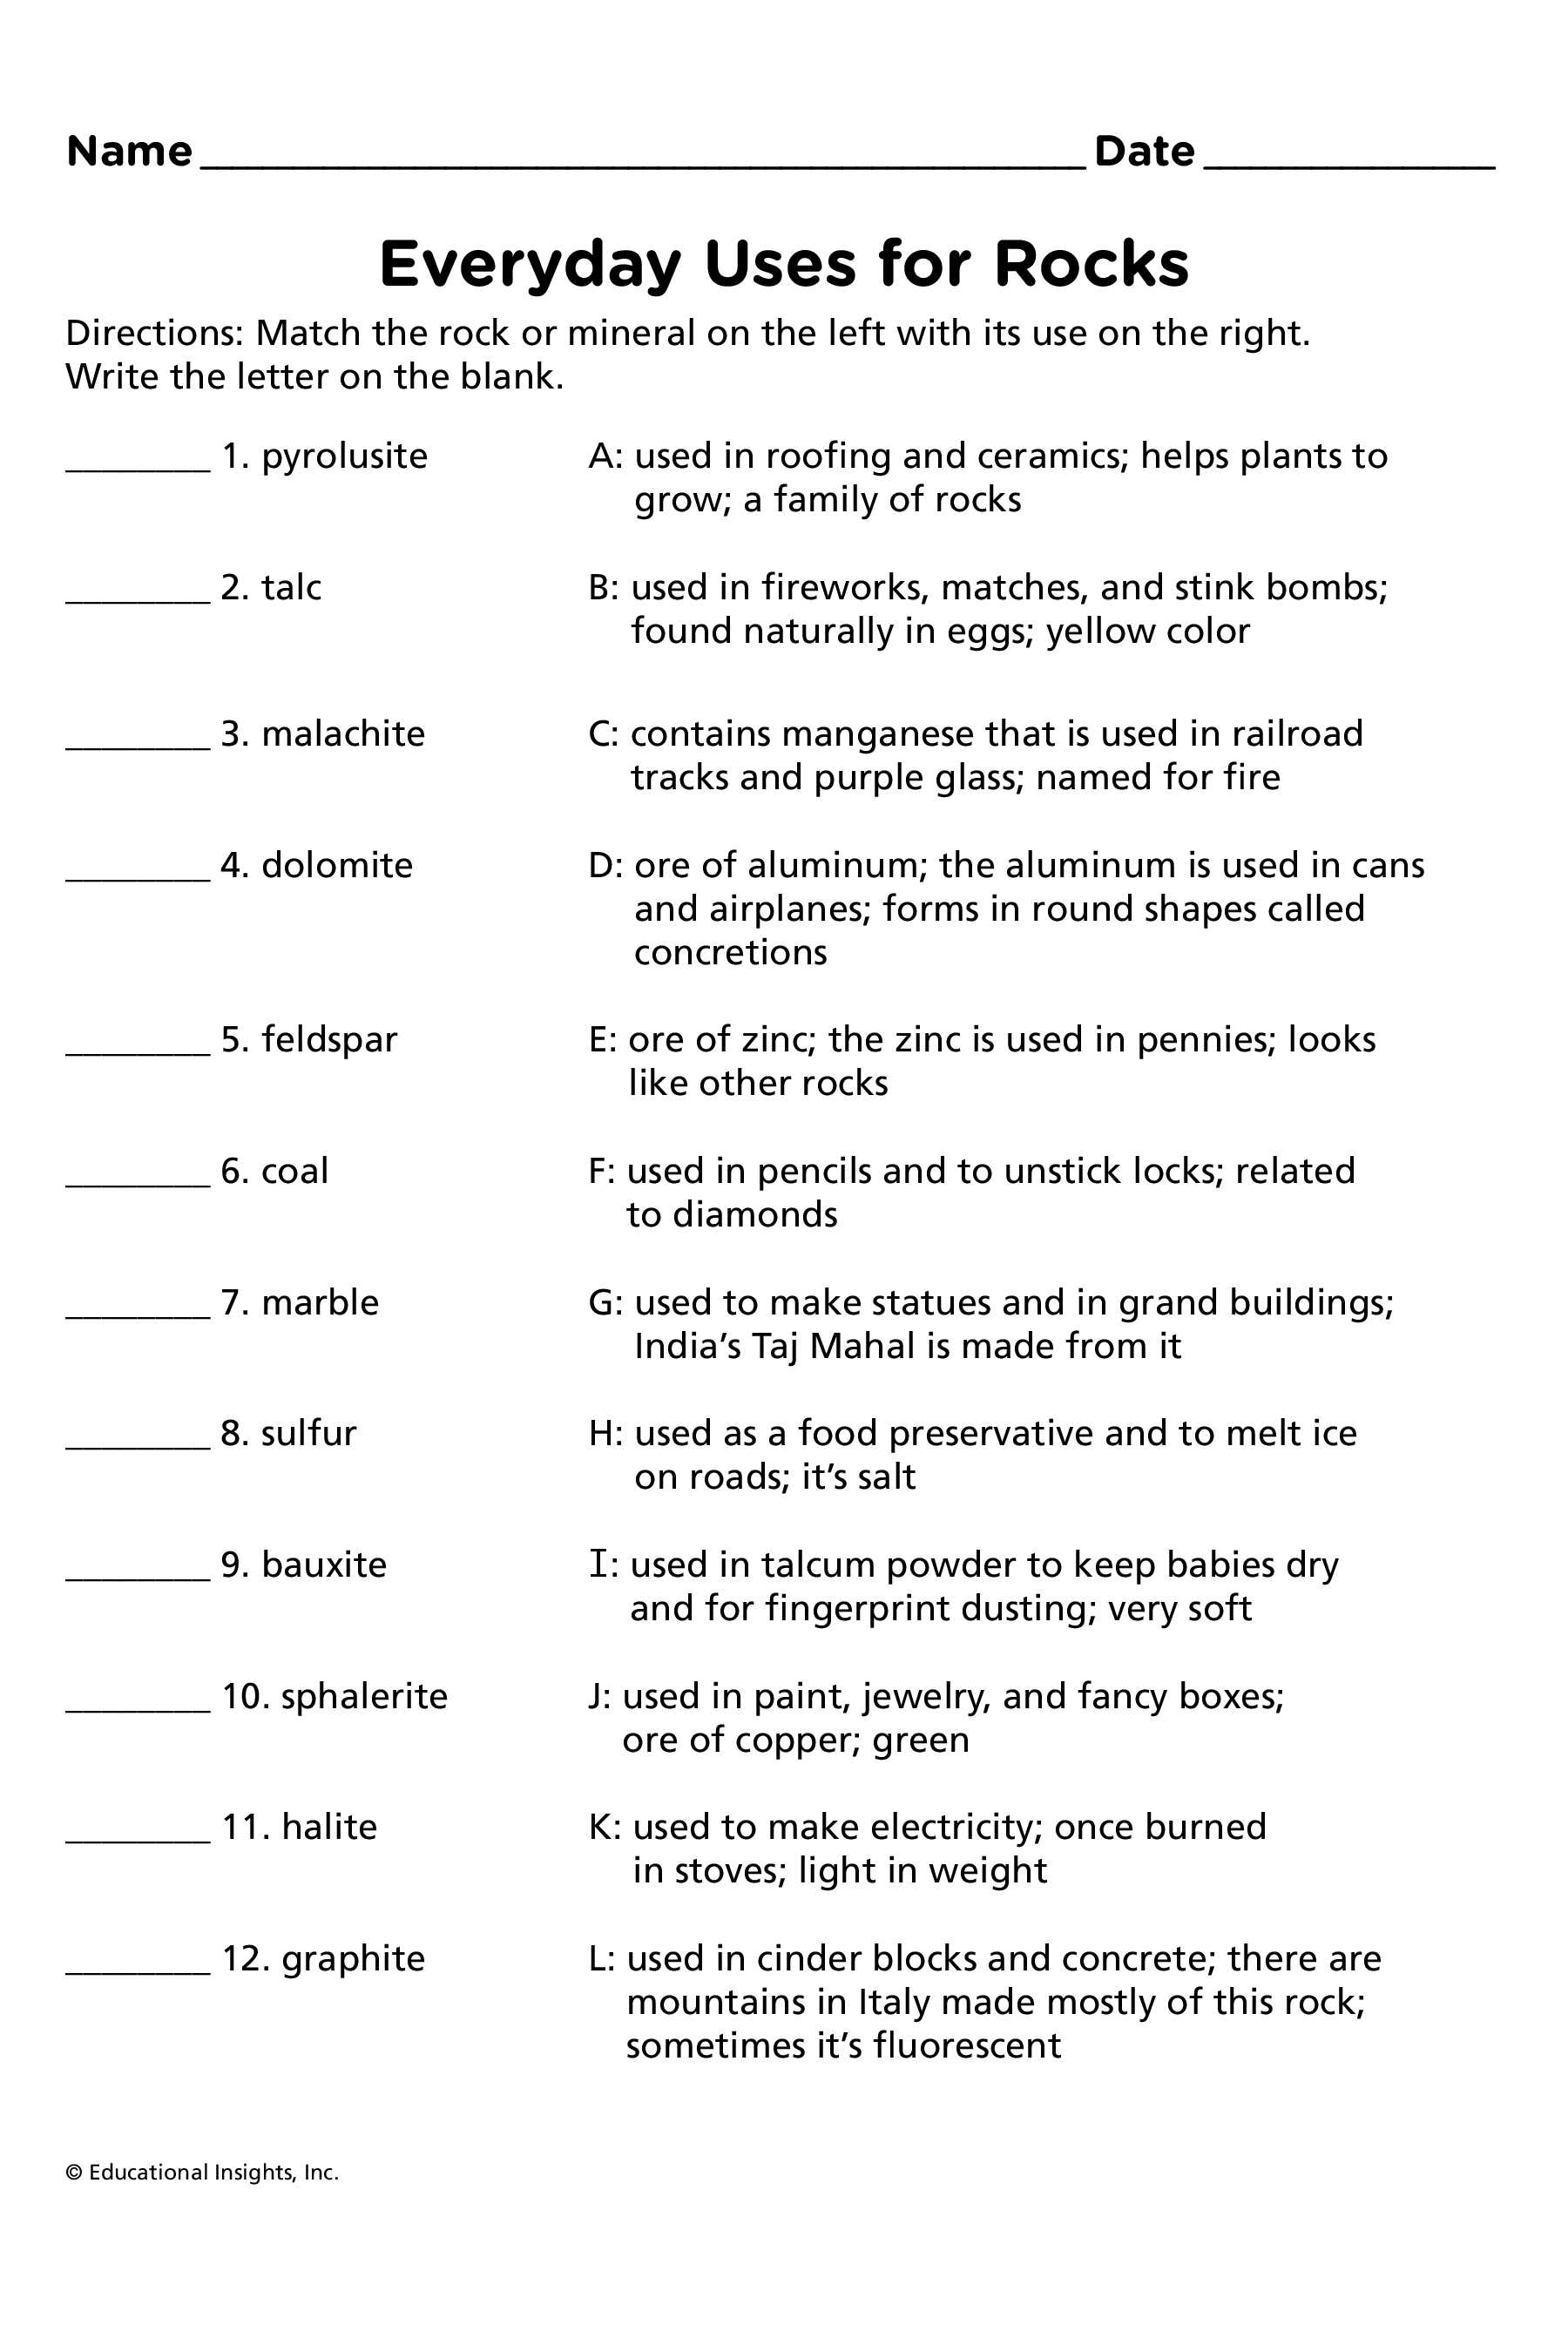 Weather and Climate Worksheets Pdf with Everyday Uses Rock & Card Set